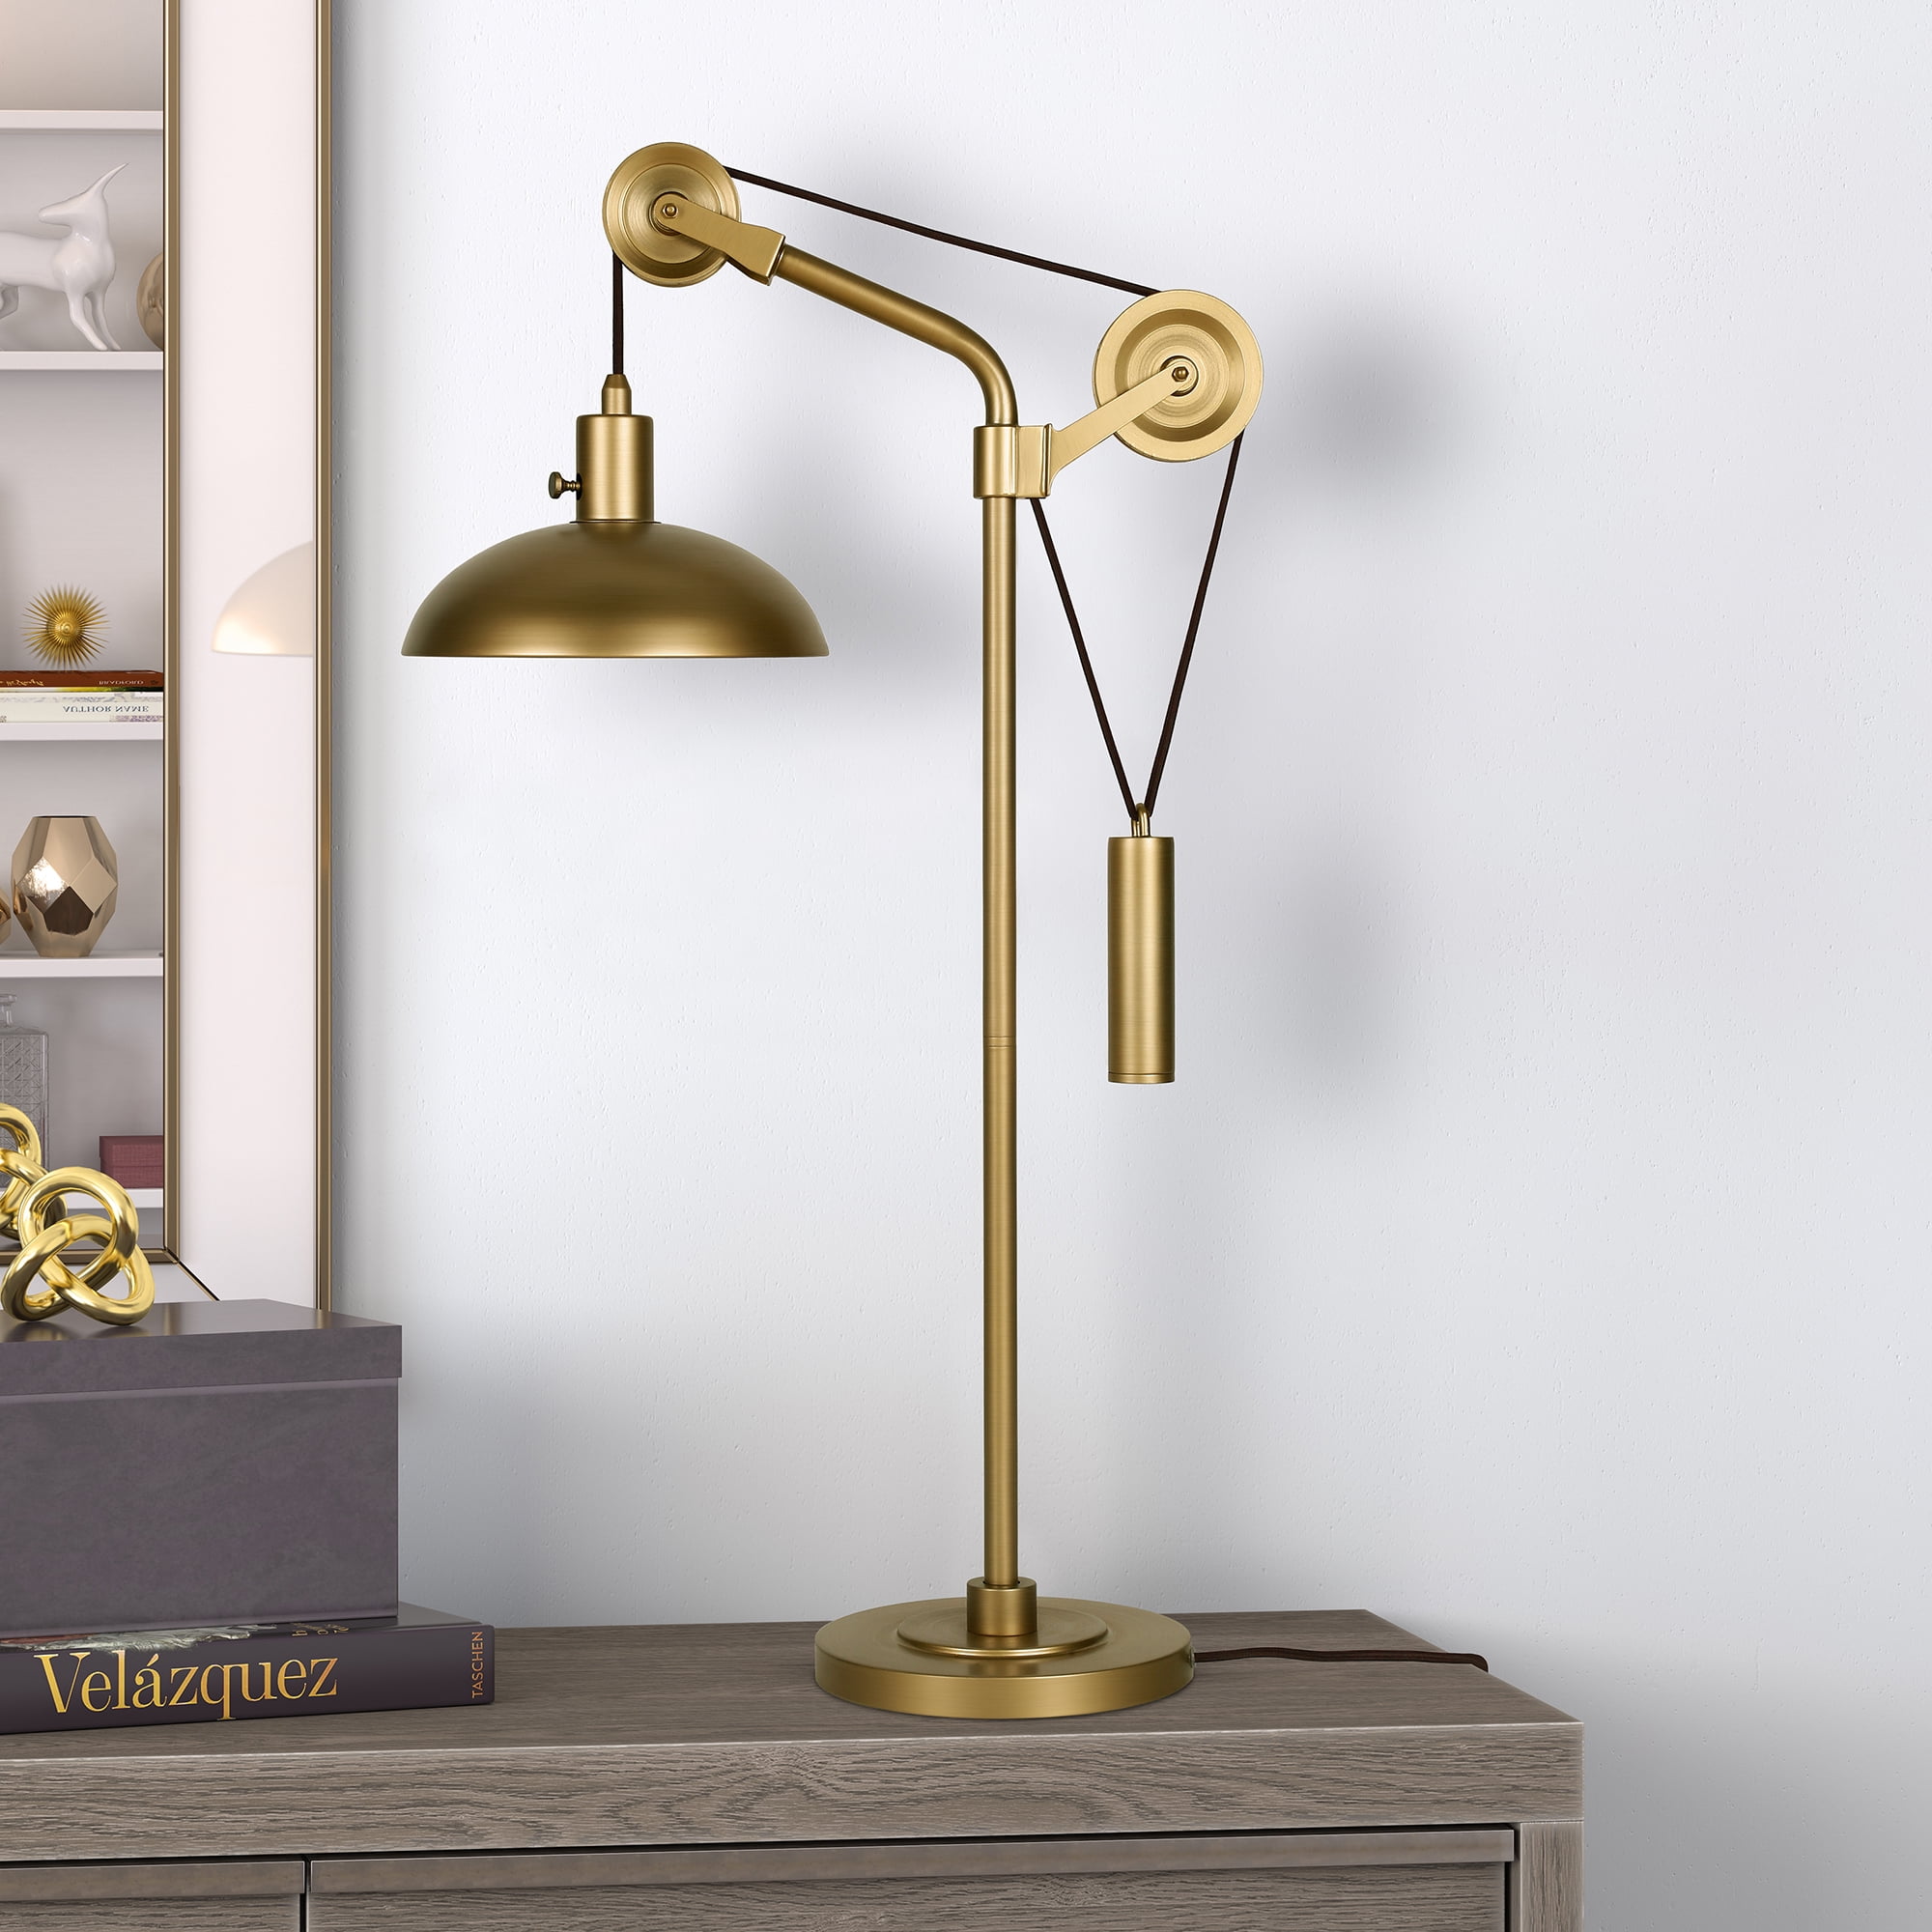 Modern Industrial, Bedside Table Lamp in contemporary brass, with metal